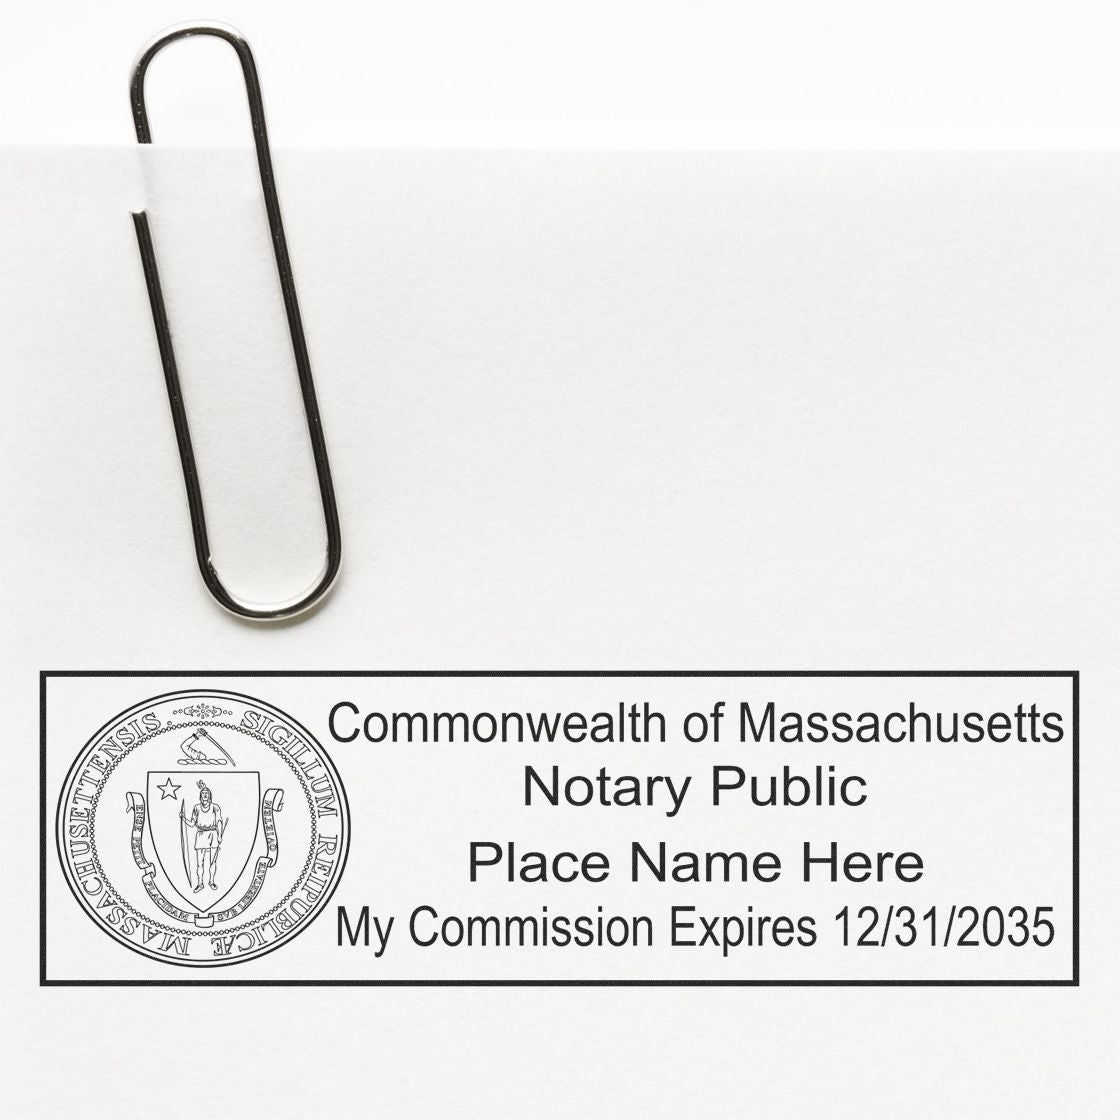 A stamped impression of the Slim Pre-Inked State Seal Notary Stamp for Massachusetts in this stylish lifestyle photo, setting the tone for a unique and personalized product.